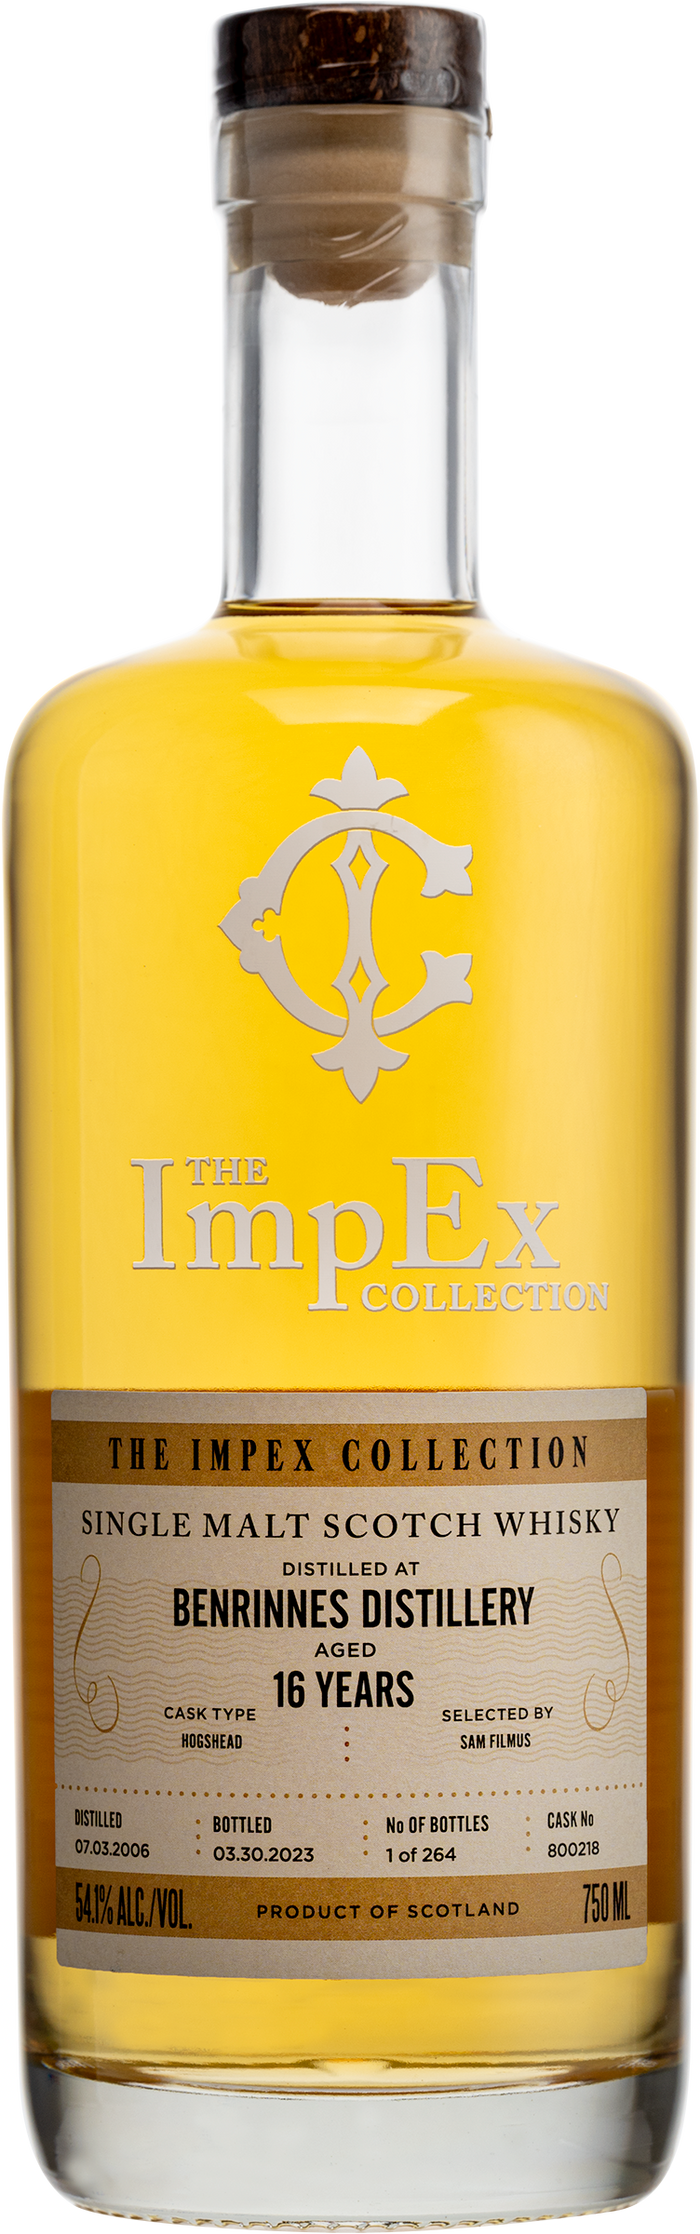 The Impex Collection Benrinnes 16 Year Old Hogshead # 800218 Speyside Single Malt 2006 Scotch Whisky